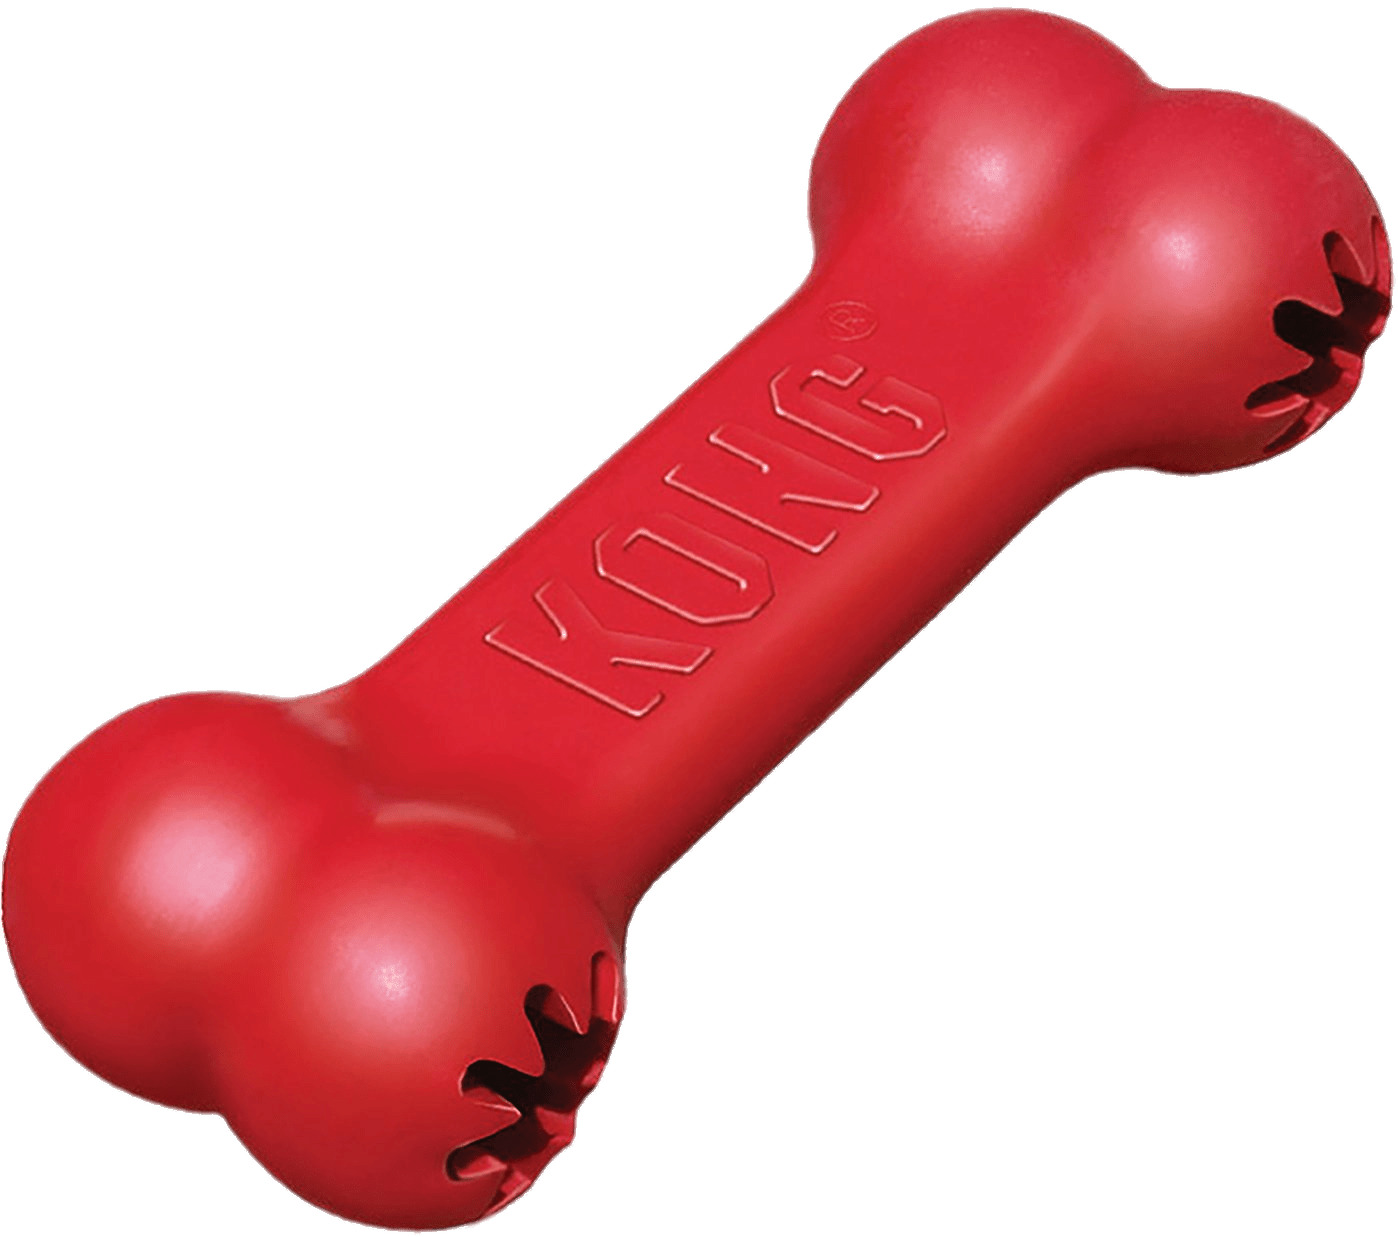 Kong Bone Toy For Dogs icons